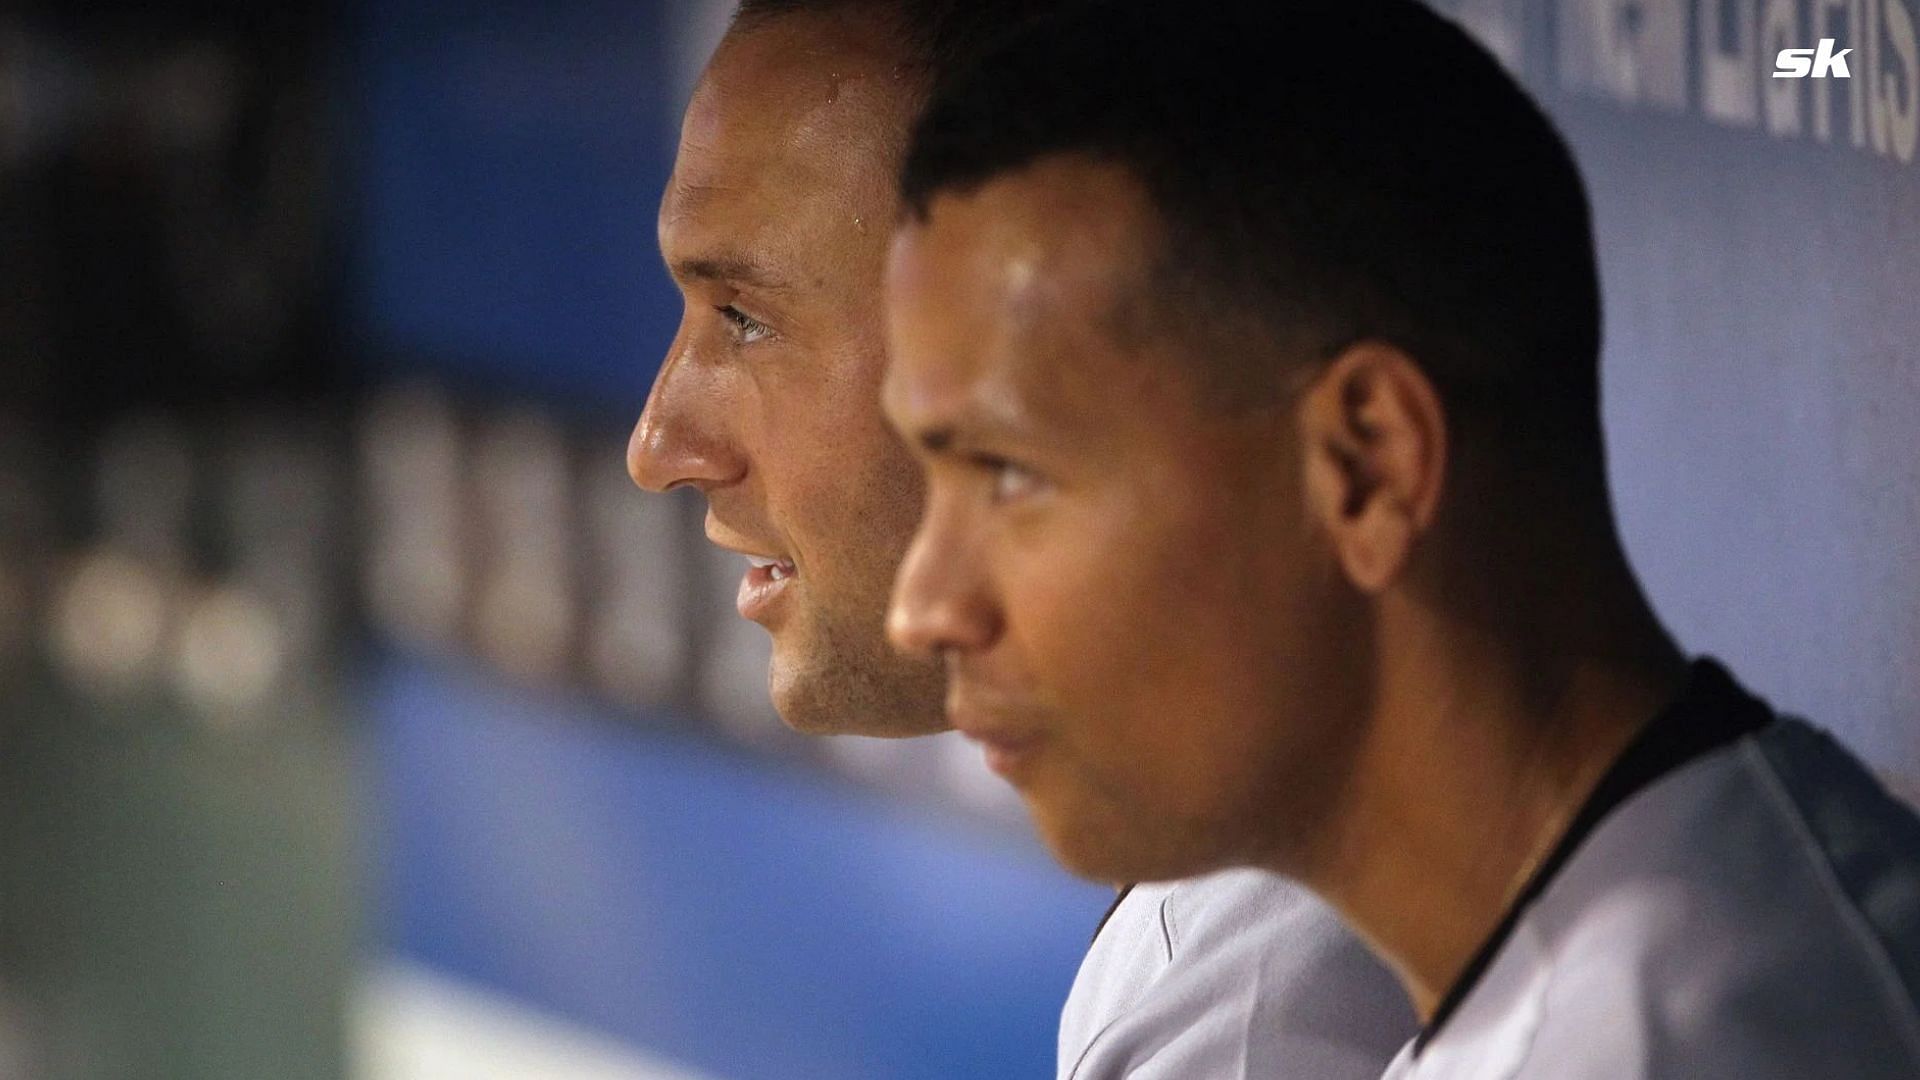 When Alex Rodriguez aired out feud with Derek Jeter after years of secrecy